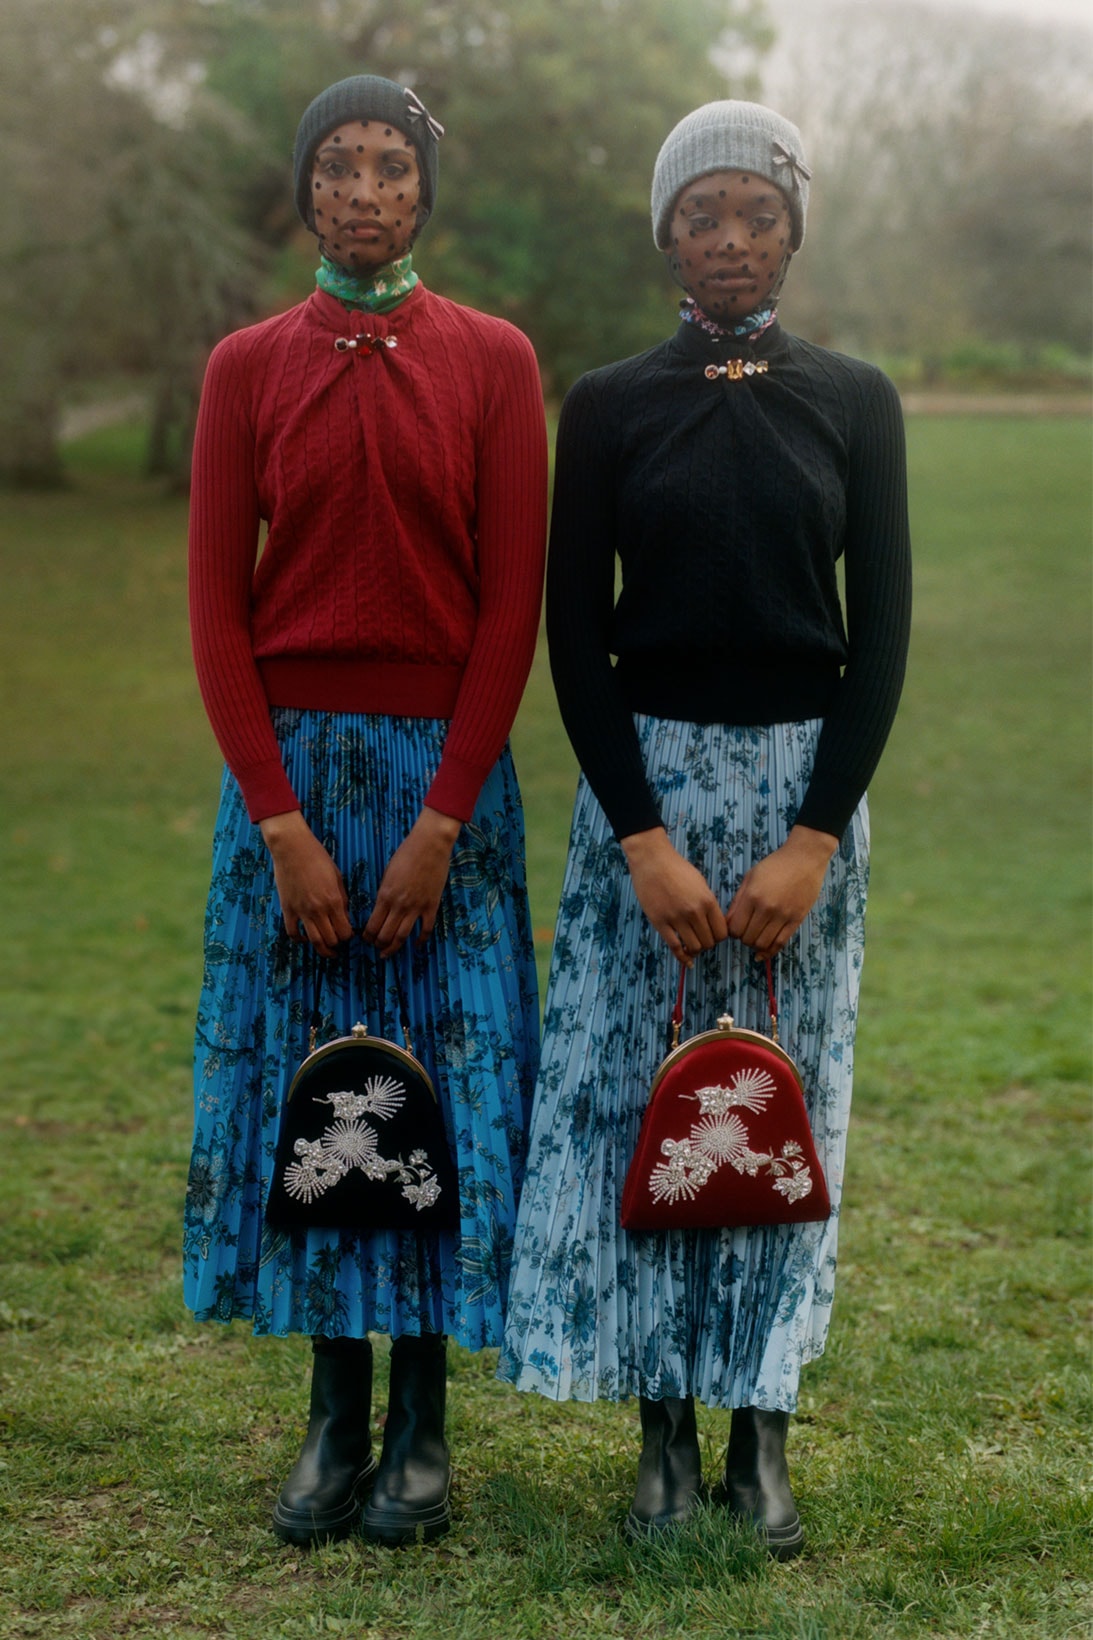 erdem moralioglu pre-fall 2021 collection lookbook nancy mitford pleated skirts floral red black sweaters